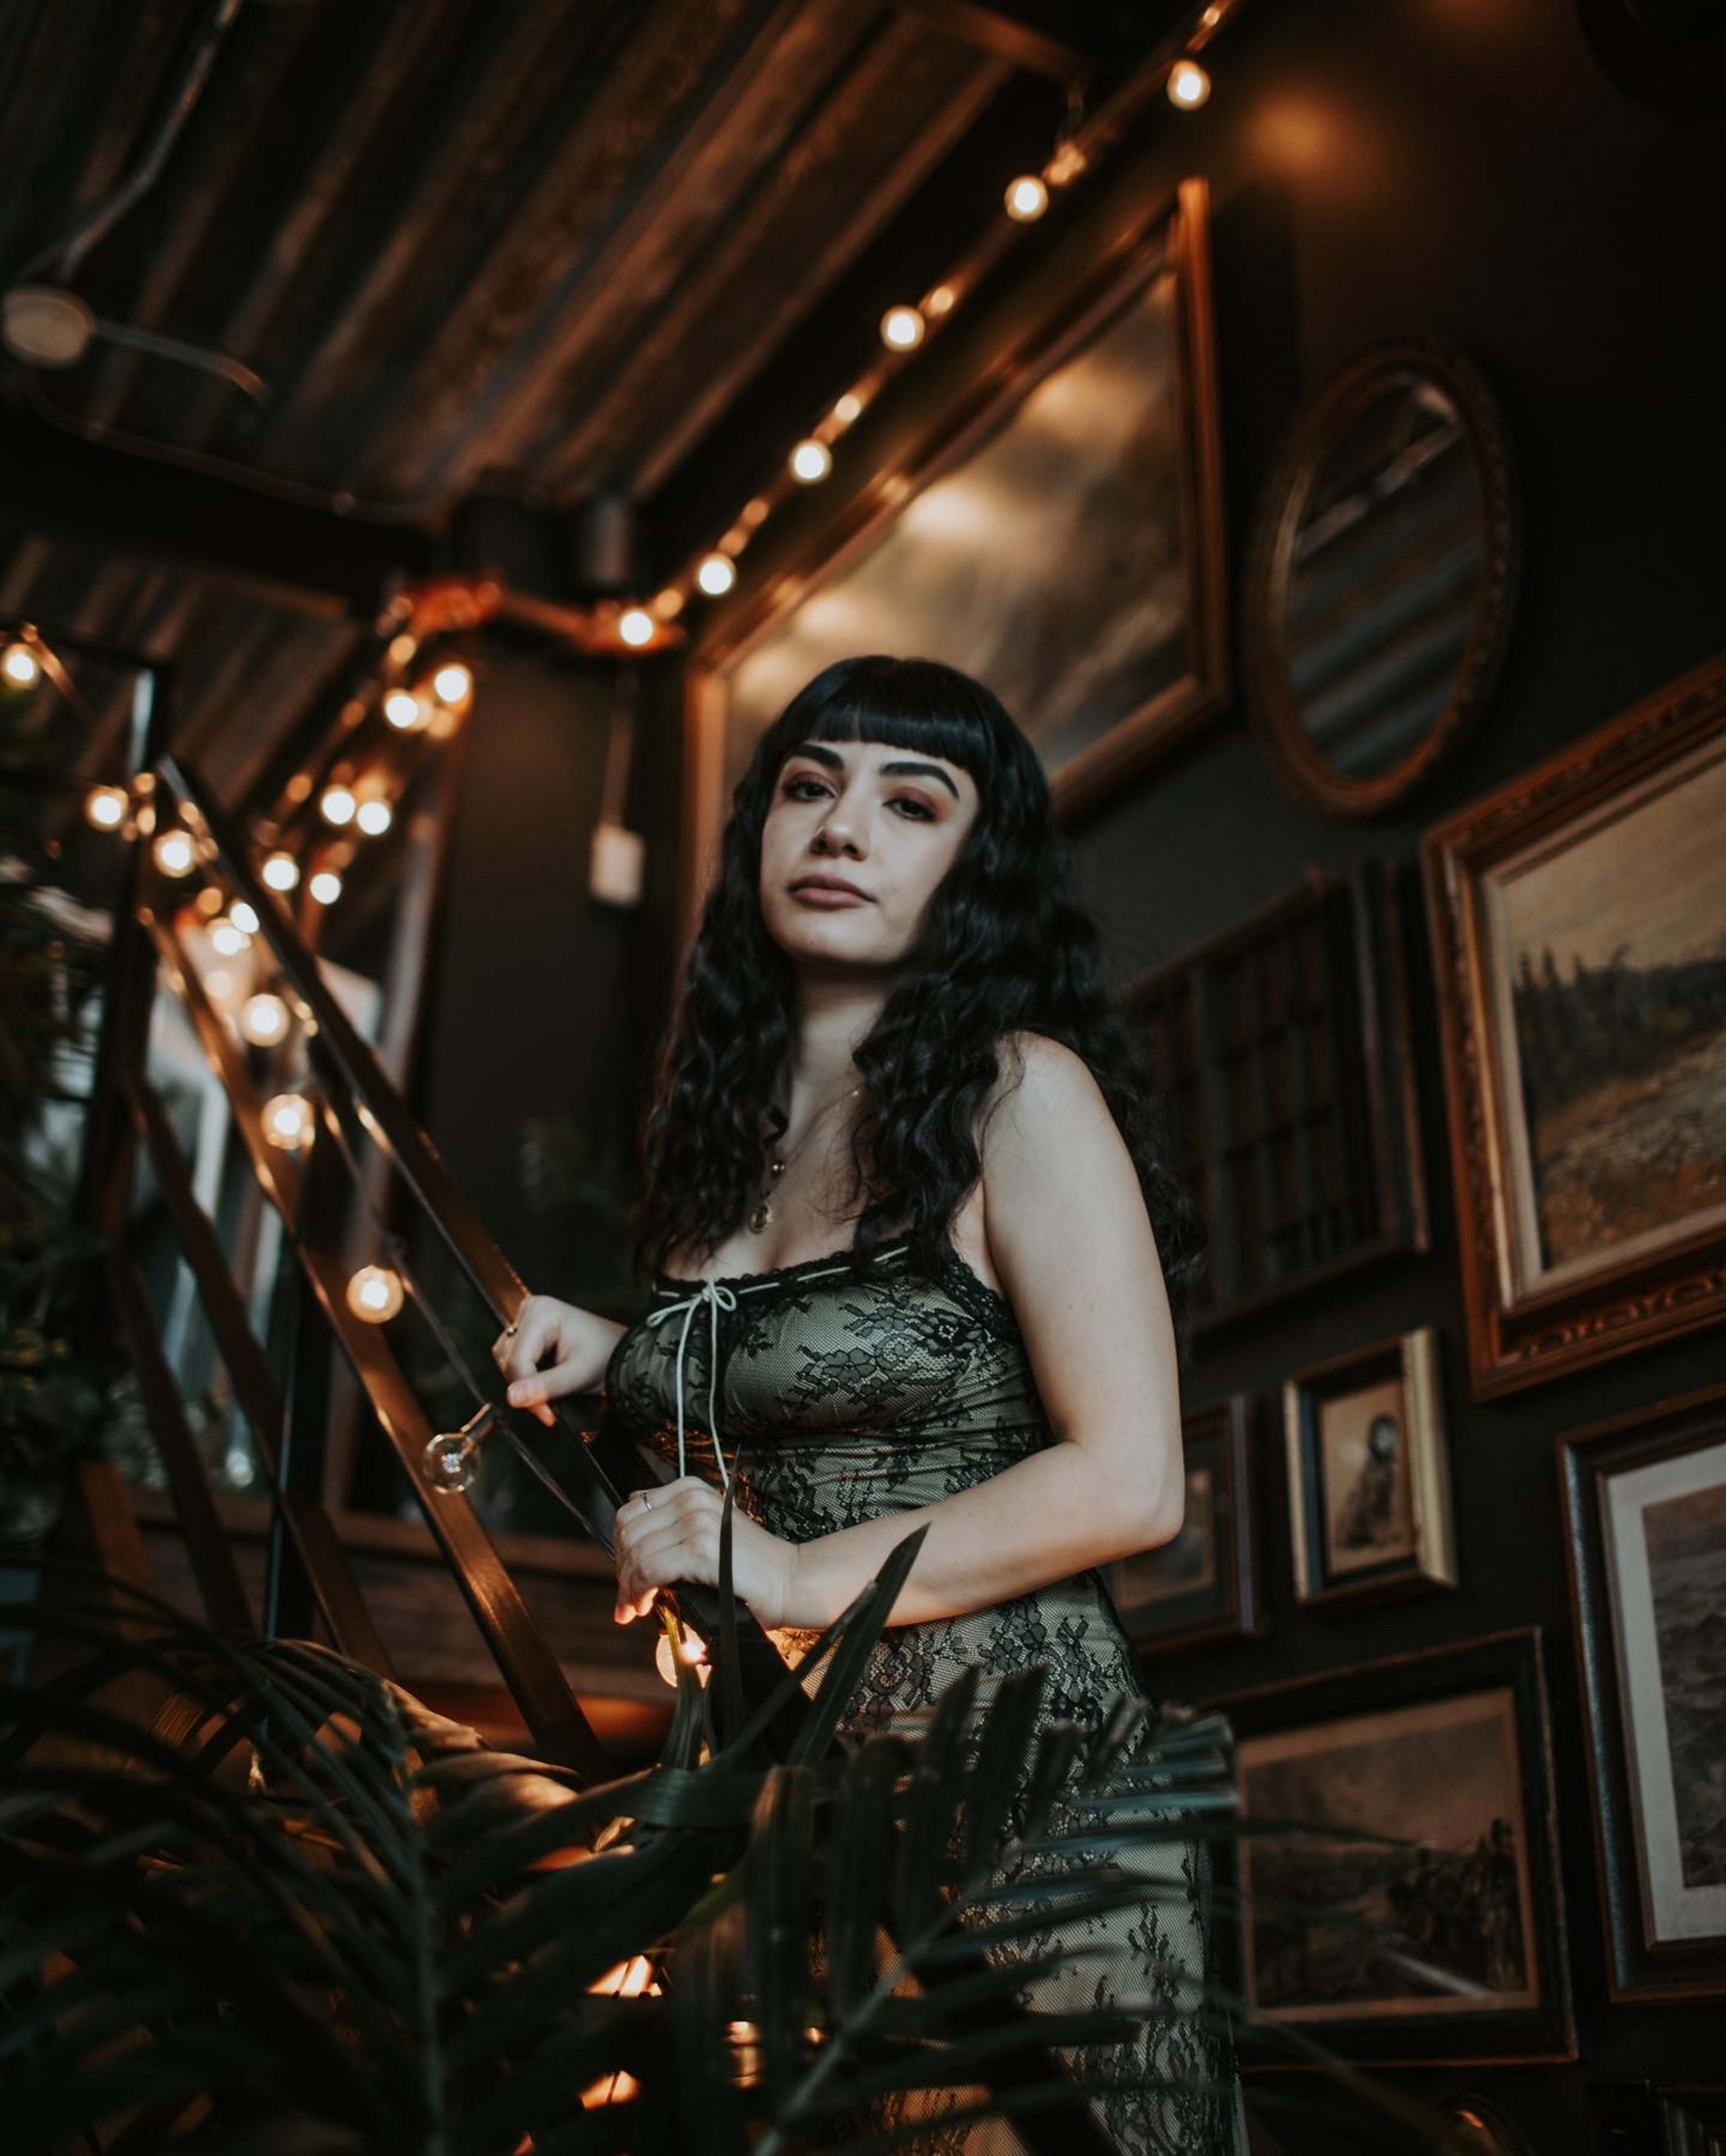 A fashion photoshoot with a woman in a green dress posing next to a staircase surrounded by plants.